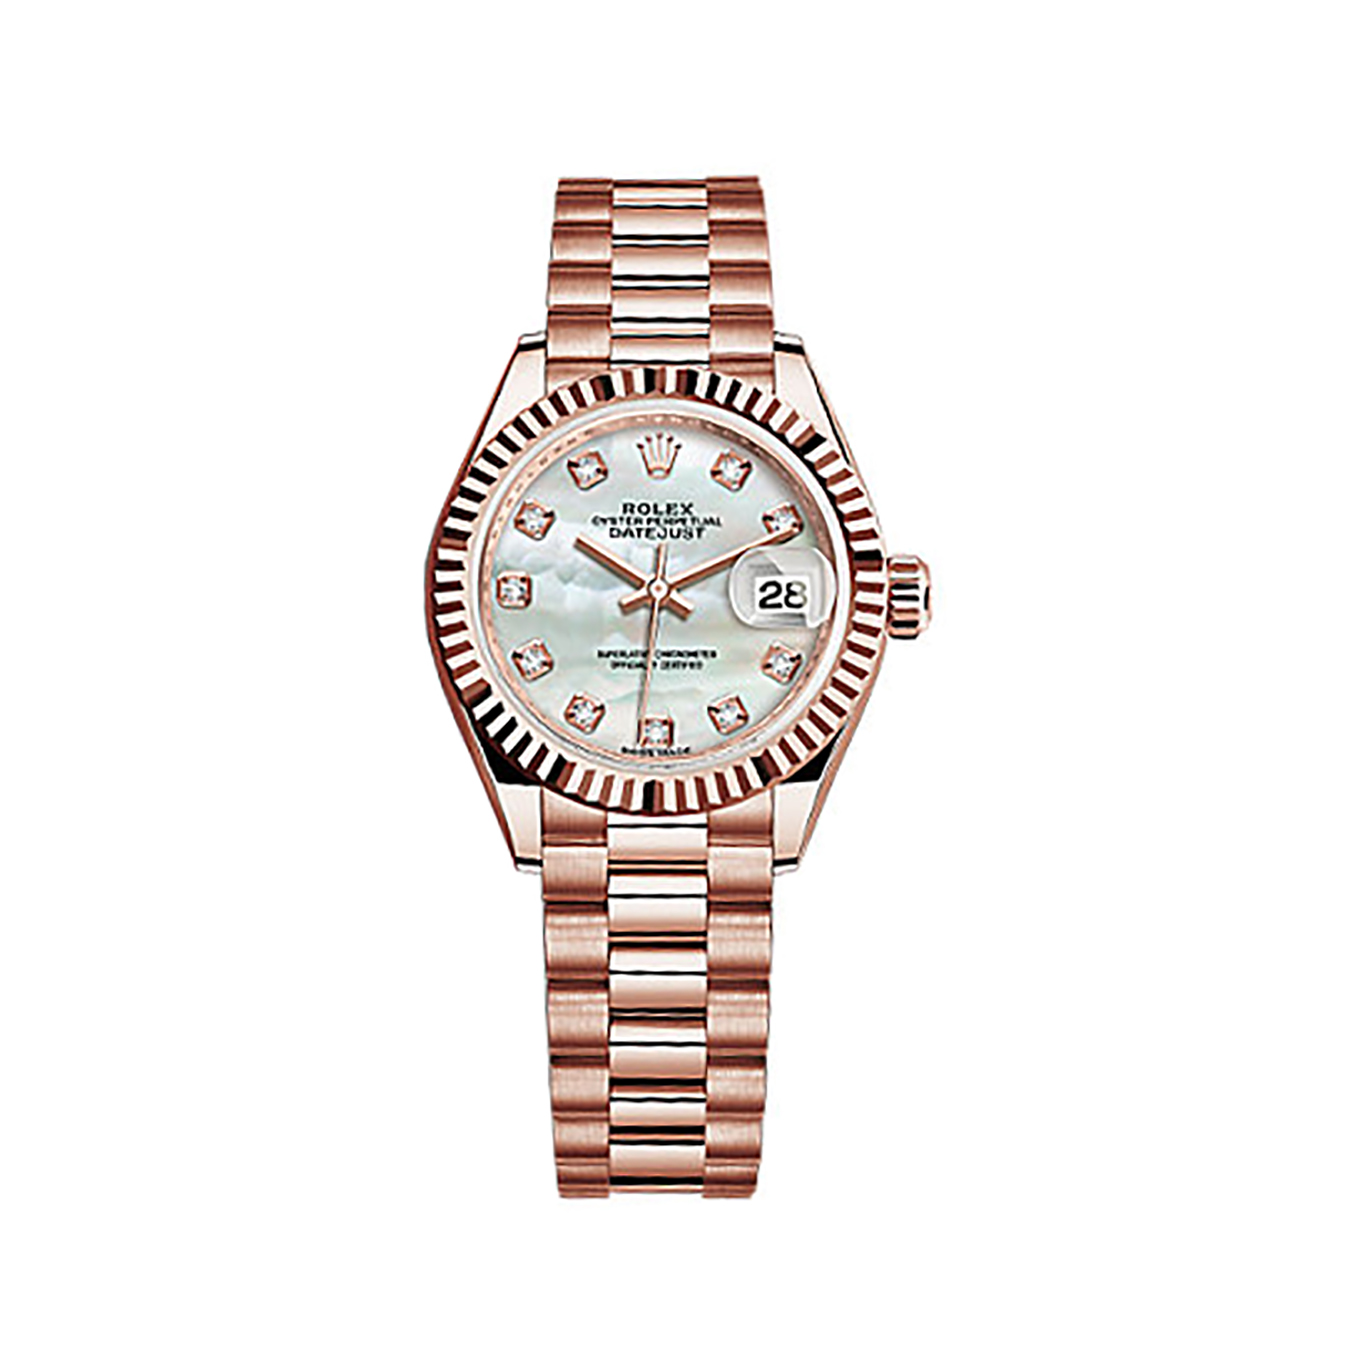 Lady-Datejust 28 279175 Rose Gold Watch (White Mother-of-pearl Set with Diamonds)